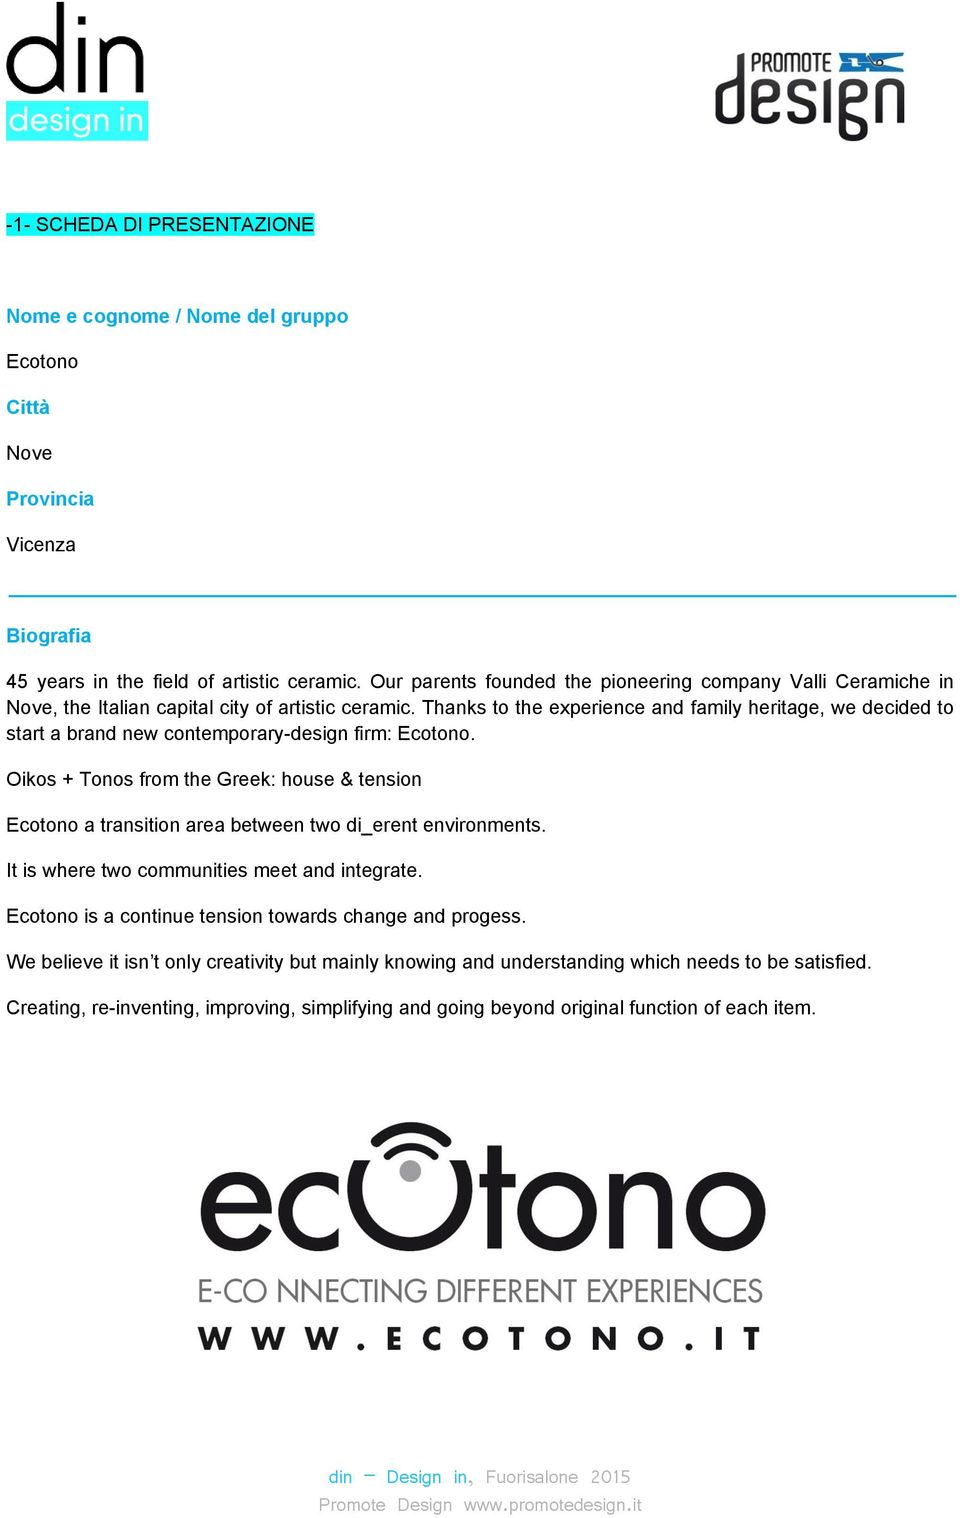 Thanks to the experience and family heritage, we decided to start a brand new contemporary-design firm: Ecotono.